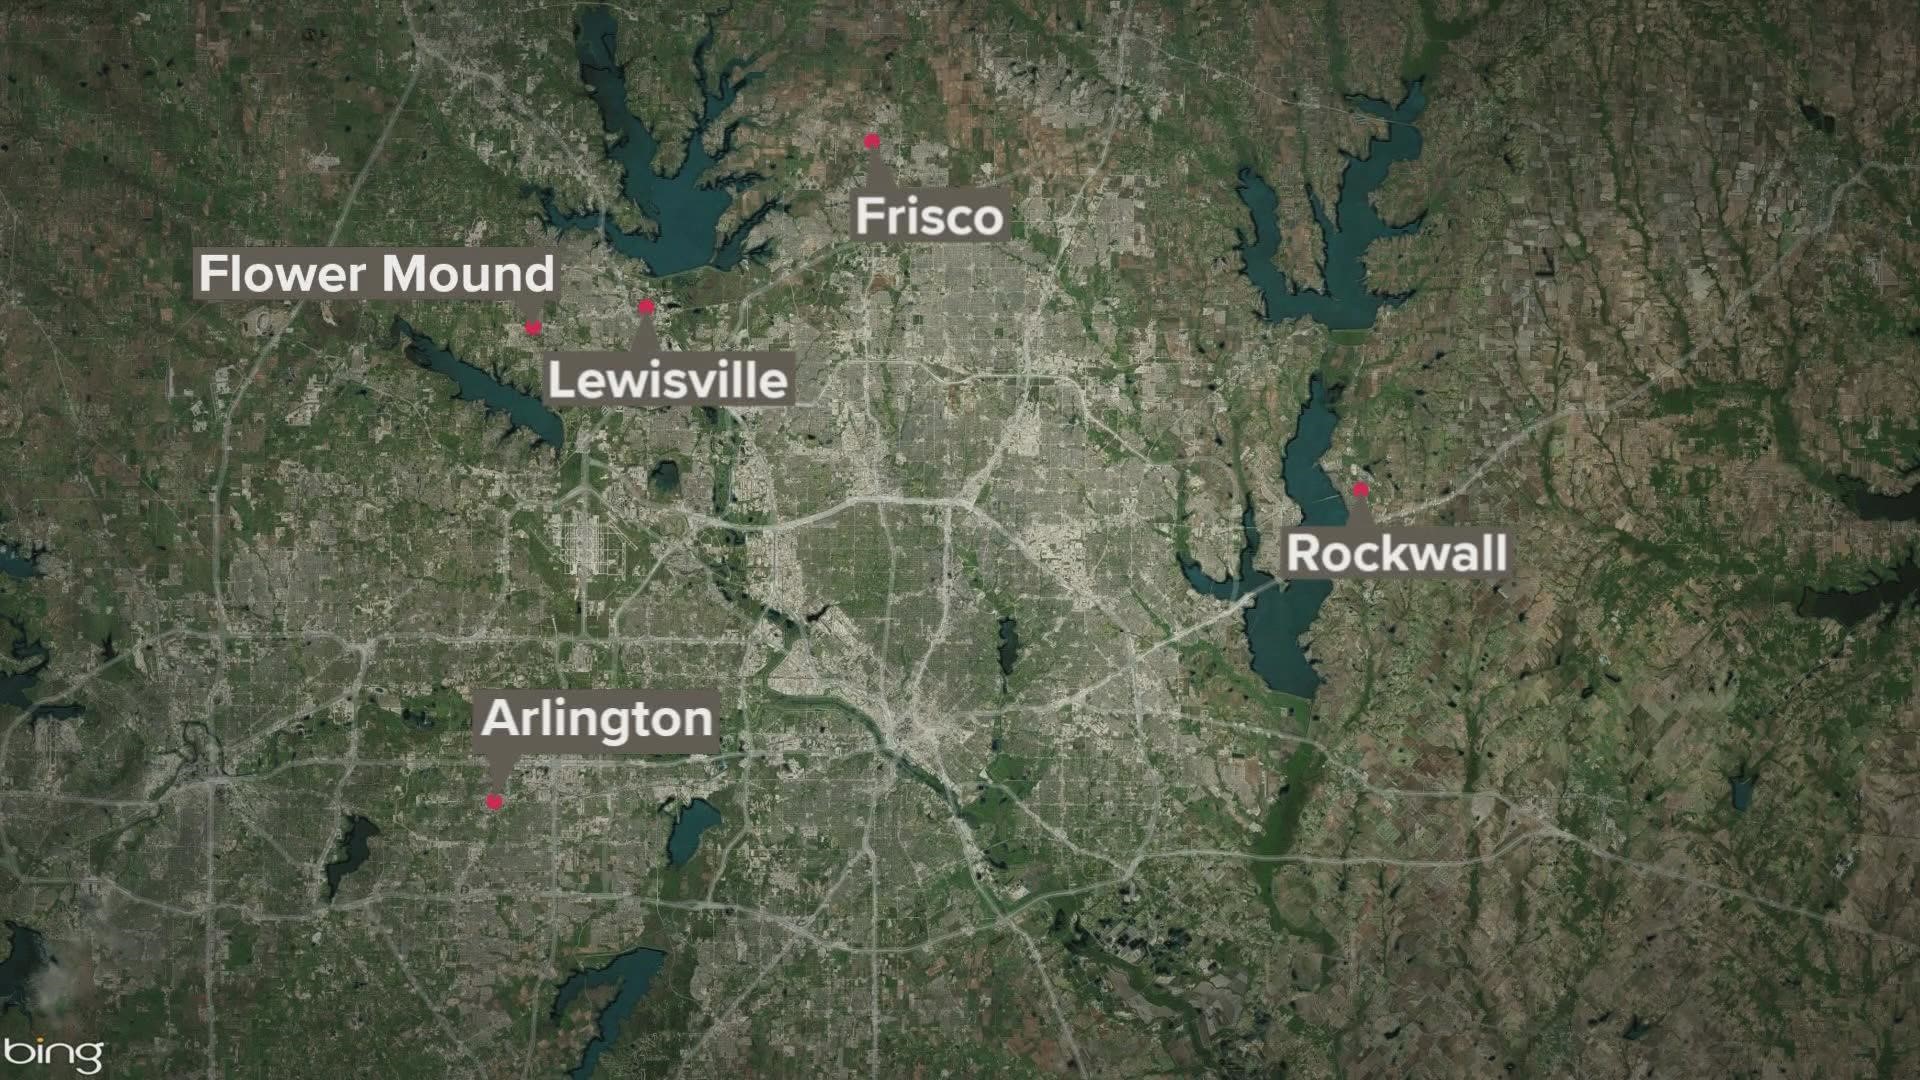 Fourteen students across North Texas have been arrested - including 10 on Friday alone - after a flurry of alleged threats prompted panic and school closures.